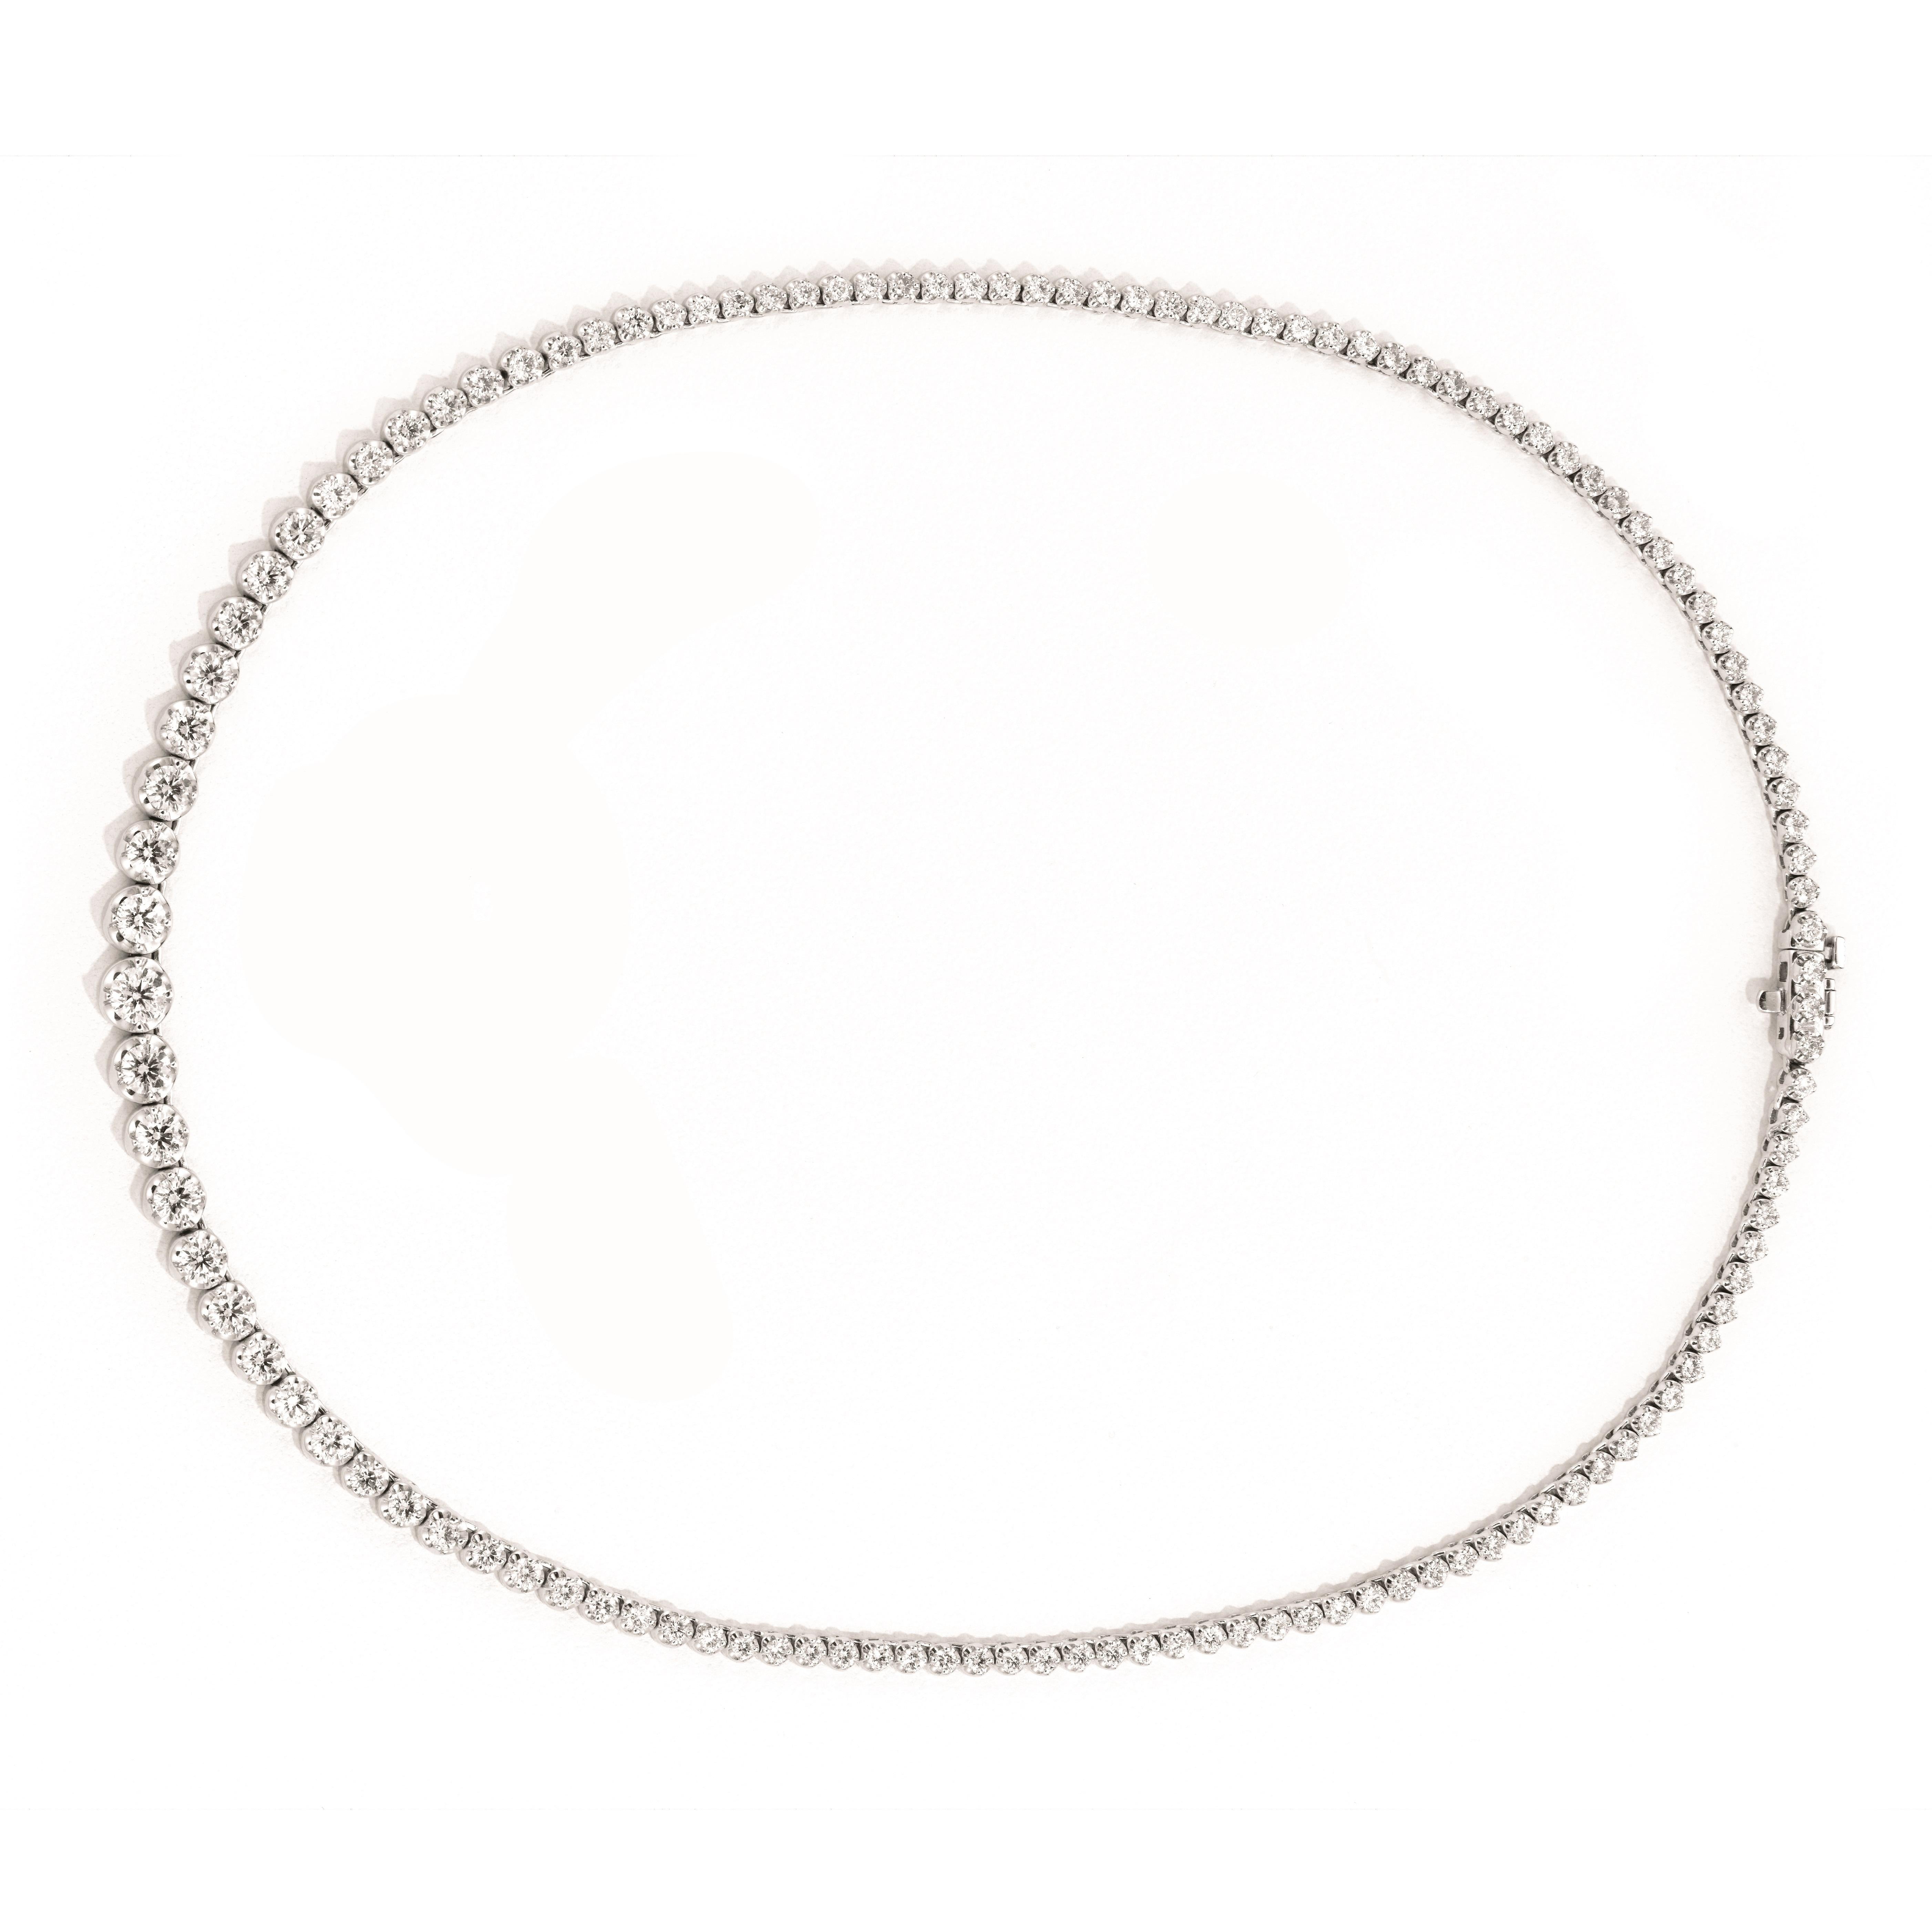 7.20 Carat Natural Diamond Graduated Tennis Necklace 14K White Gold G SI 16 inches

100% Natural Diamonds, Not Enhanced in any way Round Cut Diamond Necklace
7.20CT
G-H
SI
14K White Gold, Prong style, 20 gram
1/4 inch in width
16 inches in length
1